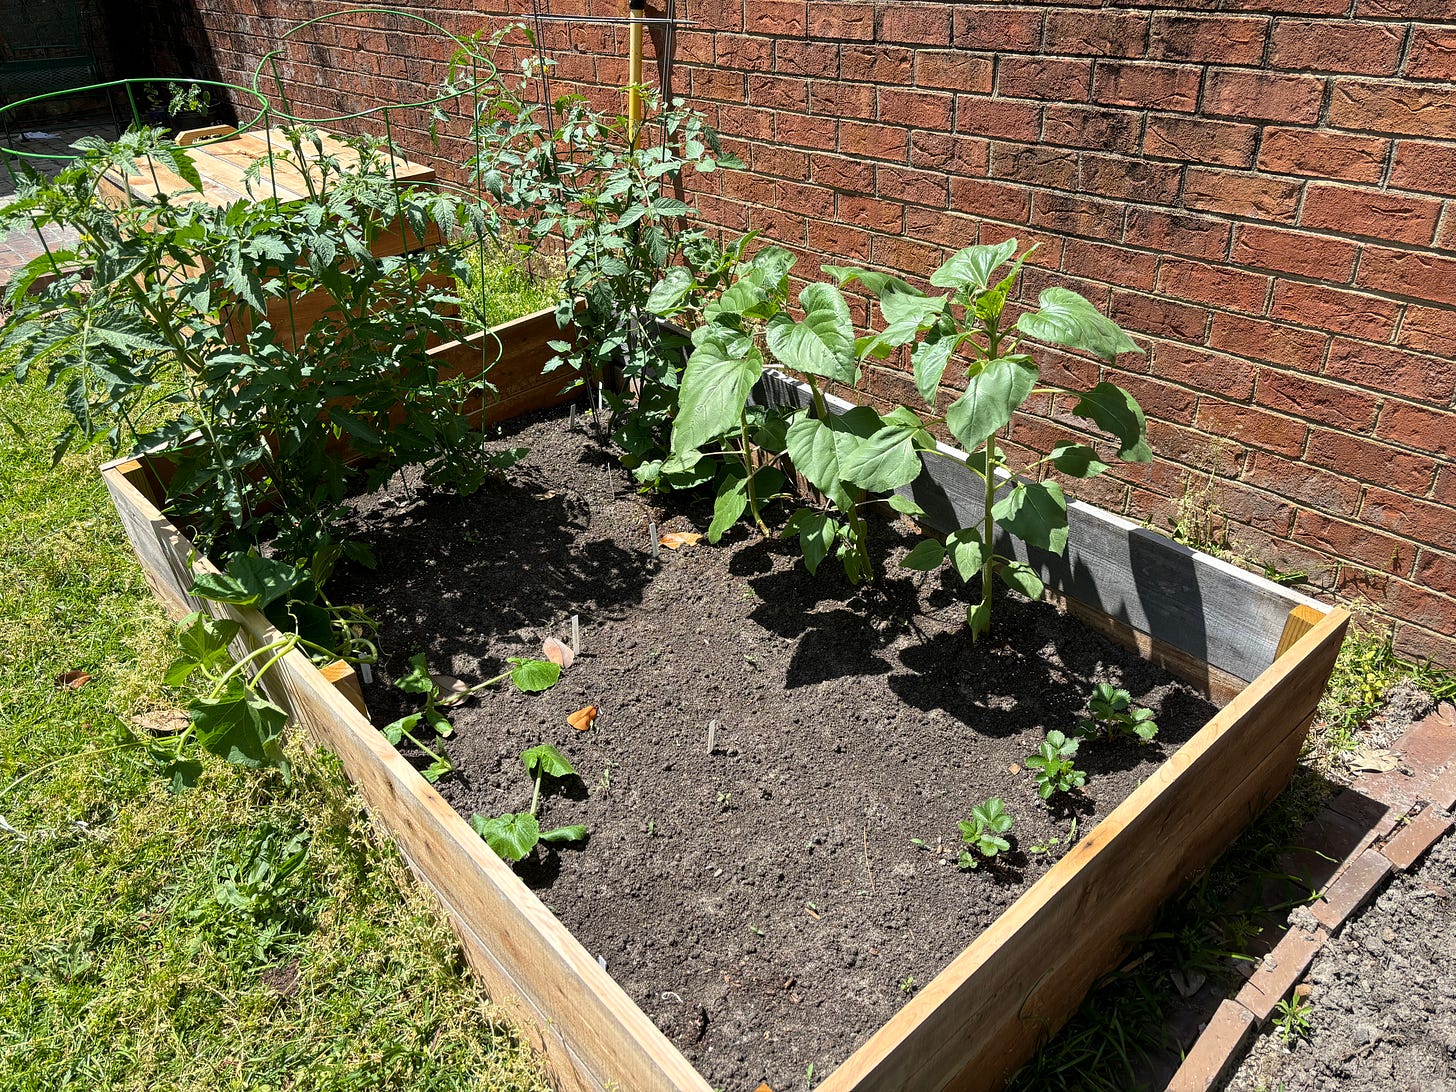 A raised bed with three tomato plants, three sunflowers, some strawberry plants, and a number of seedlings